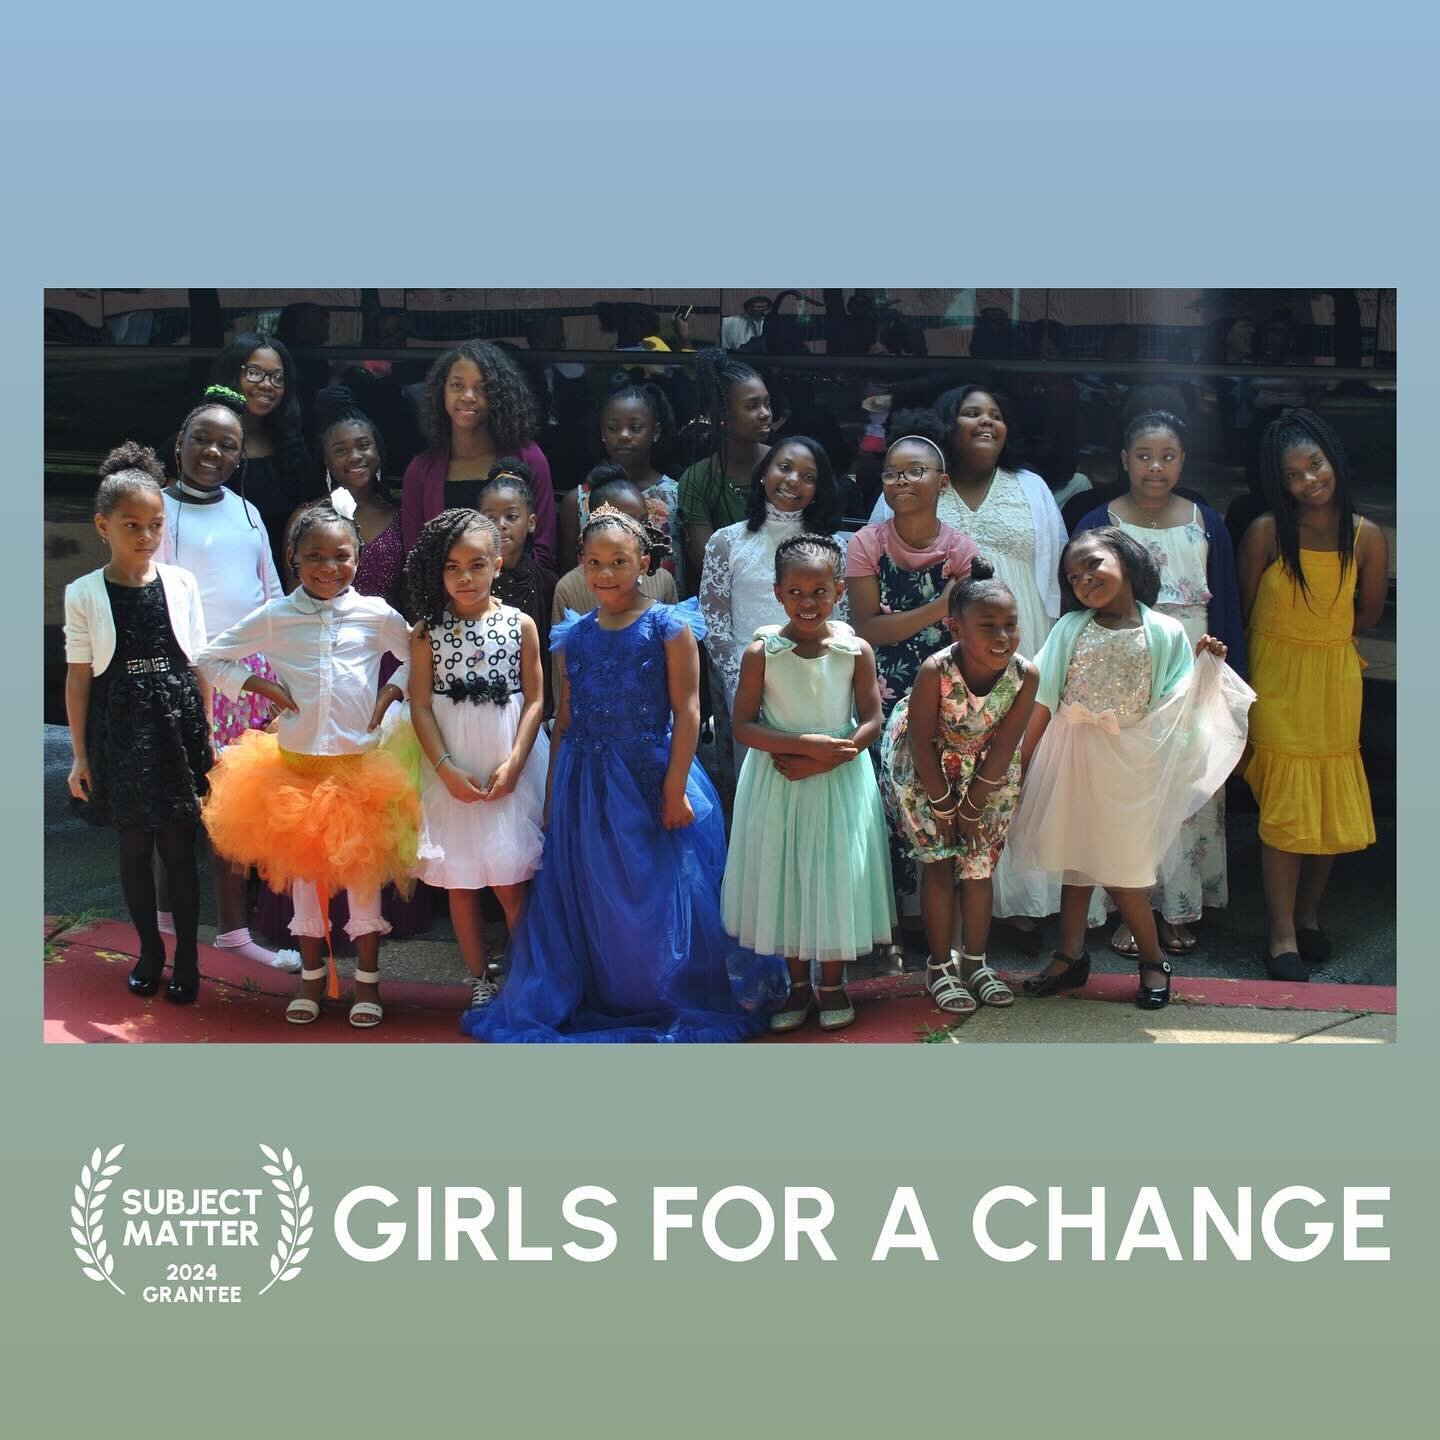 We&rsquo;re headed to #Sundance to award grants to @daughtersdocumentary and @girlsforachange !  The nonprofit: GIRLS FOR A CHANGE is receiving a $20,000 grant to grant will help establish an education fund that will provide much needed resources so 